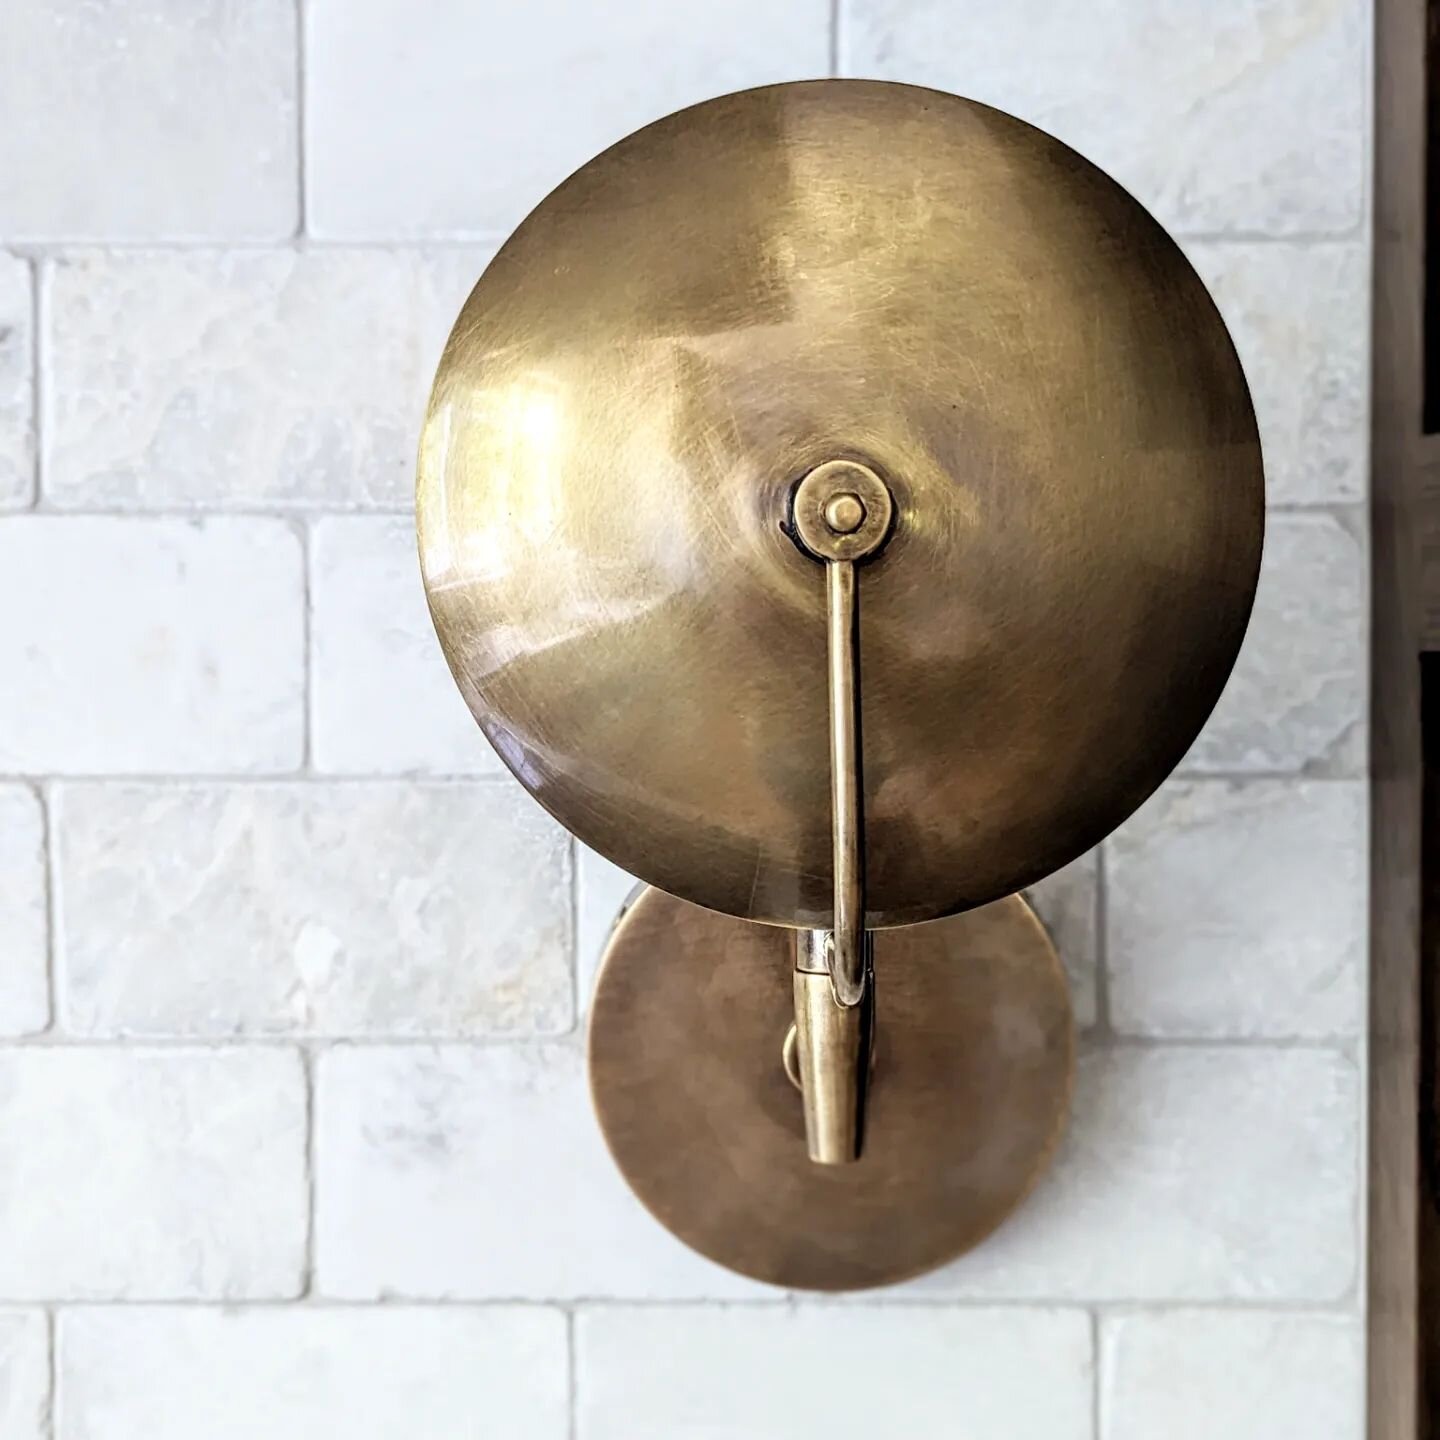 Just some of the antique brass details that give the #ClapboardColonialProject kitchen its character.